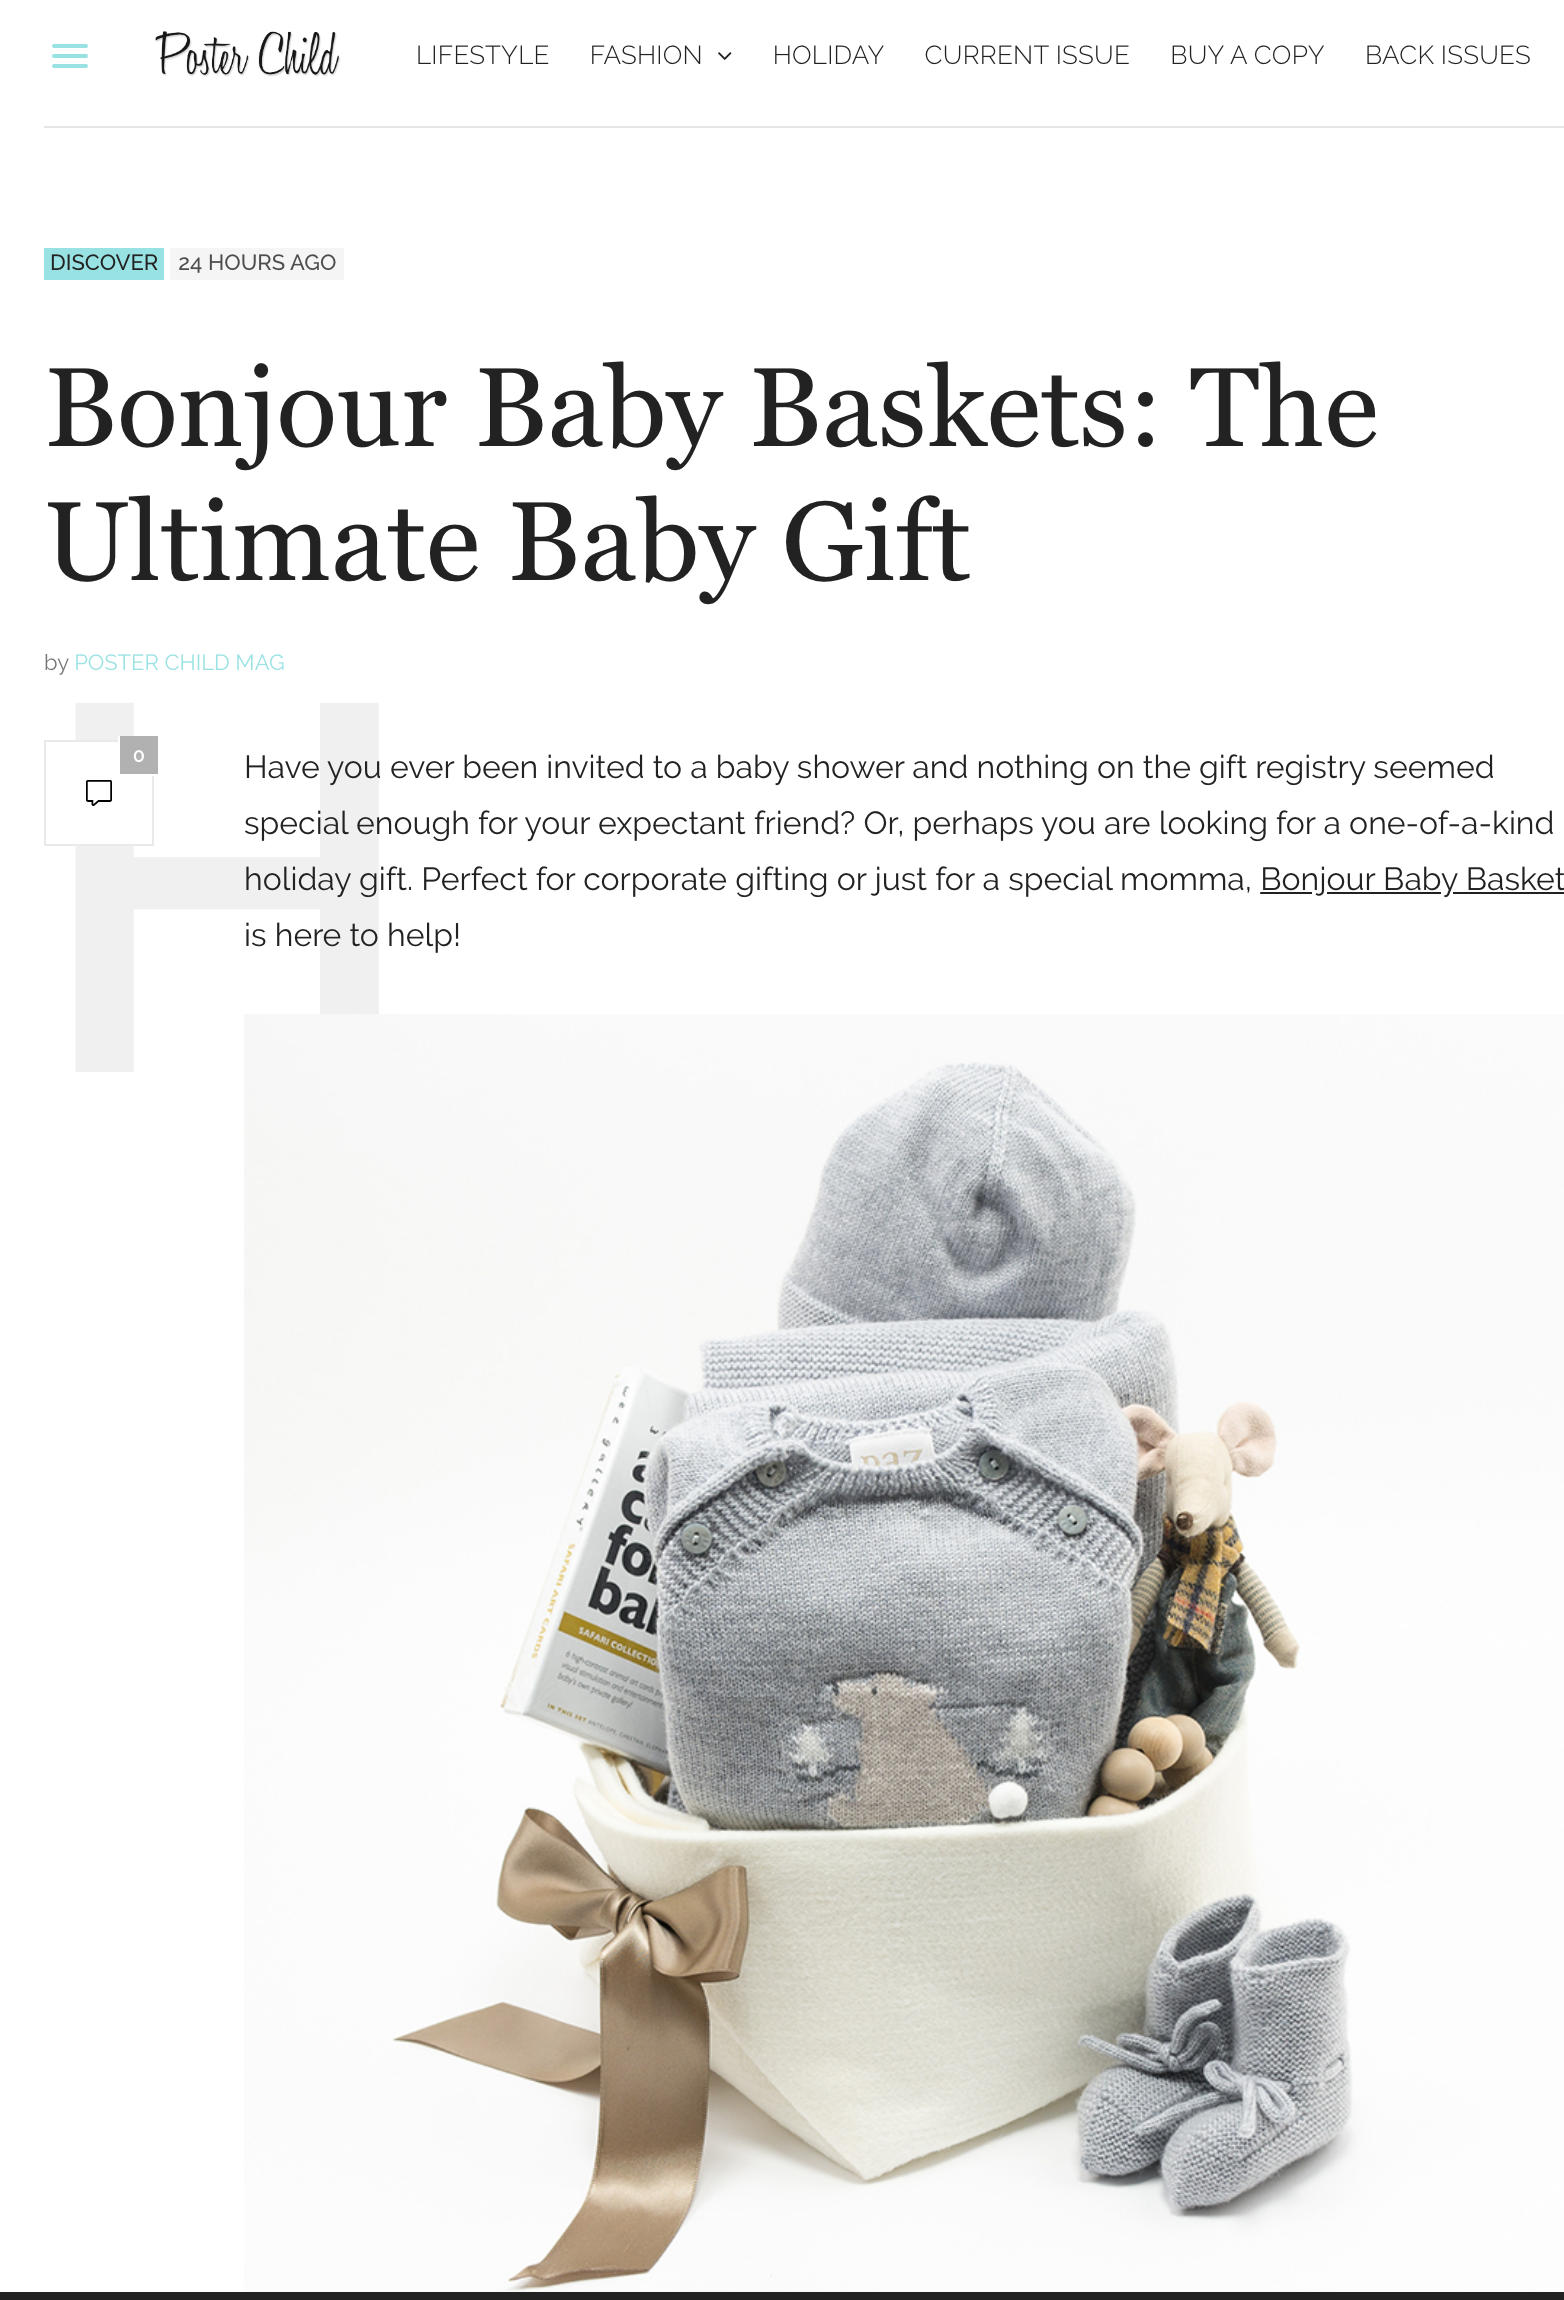 Bonjour Baby Baskets review by Poster Child Magazine